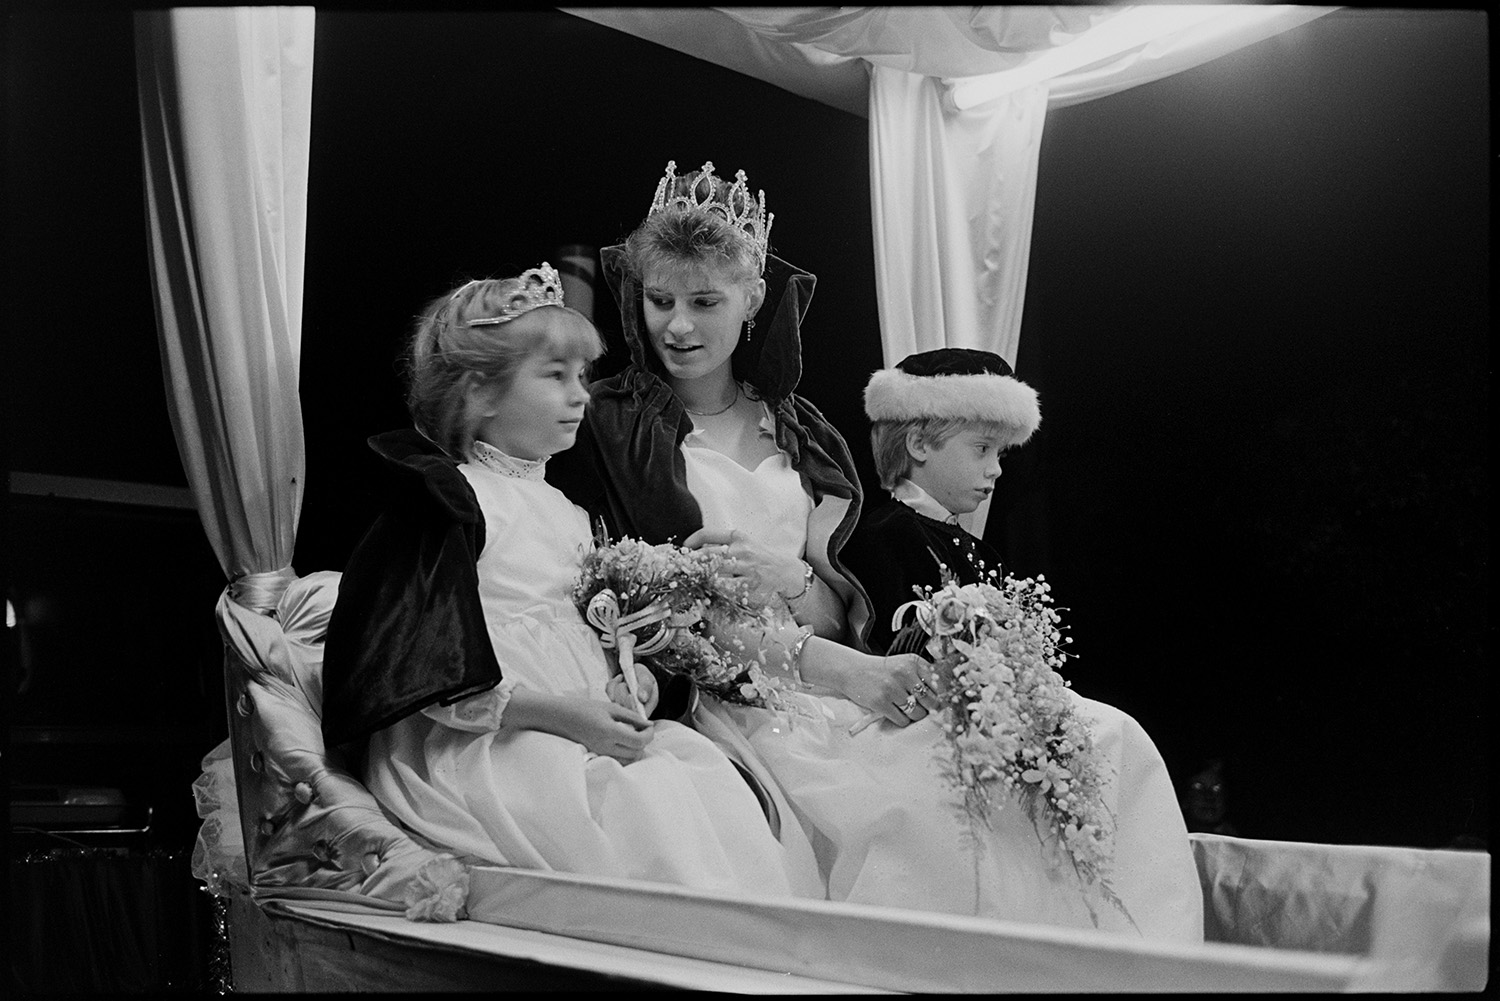 Carnival floats at night, Queen and attendants, fancy dress.
[The Dolton Carnival Queen and her two young attendants sitting on a float during the evening procession at Dolton Carnival.]